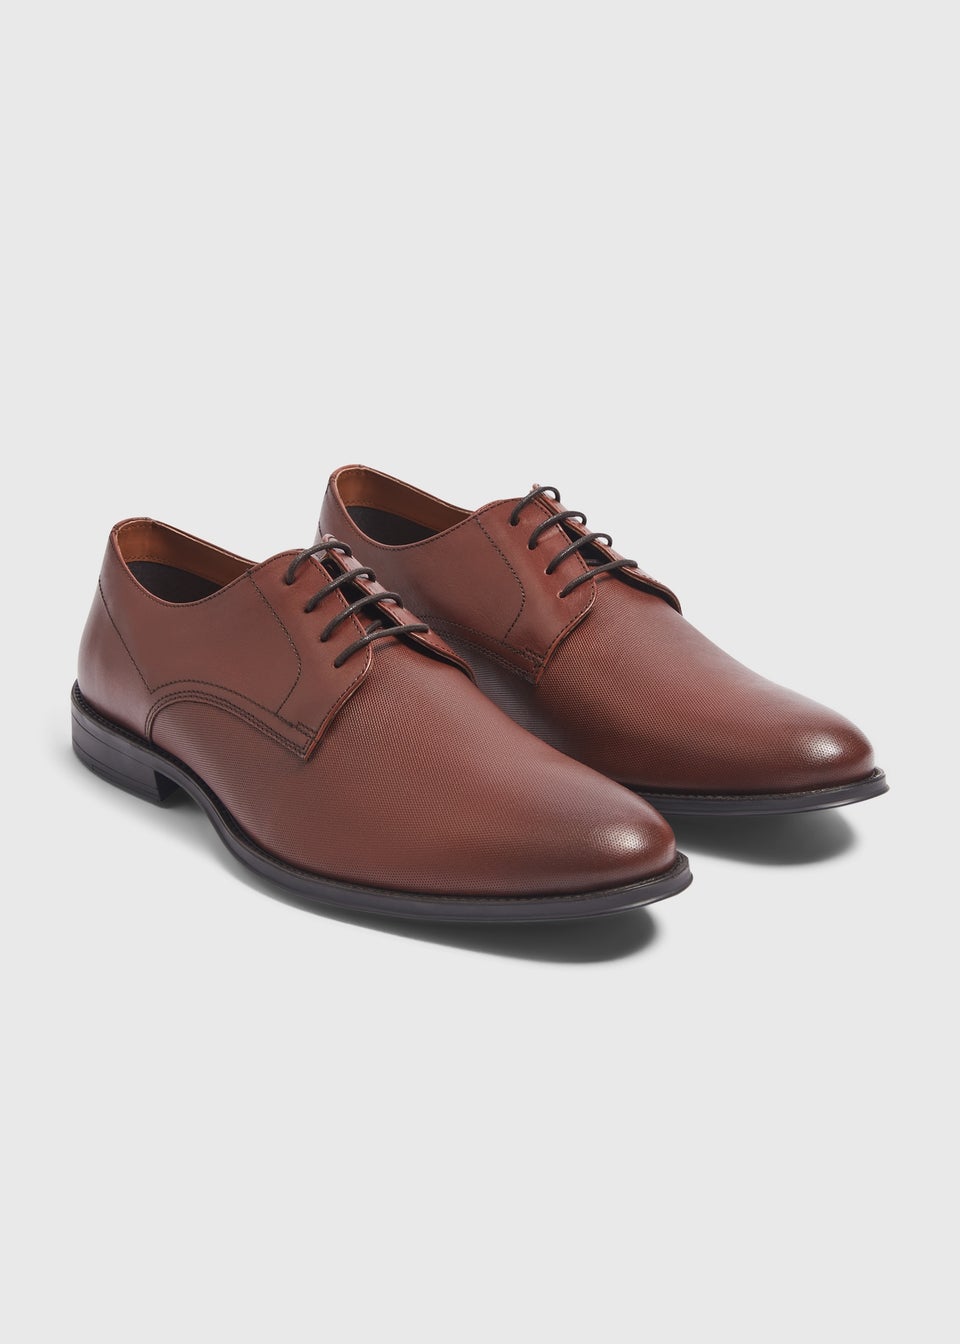 Taylor & Wright Brown Leather Derby Shoes